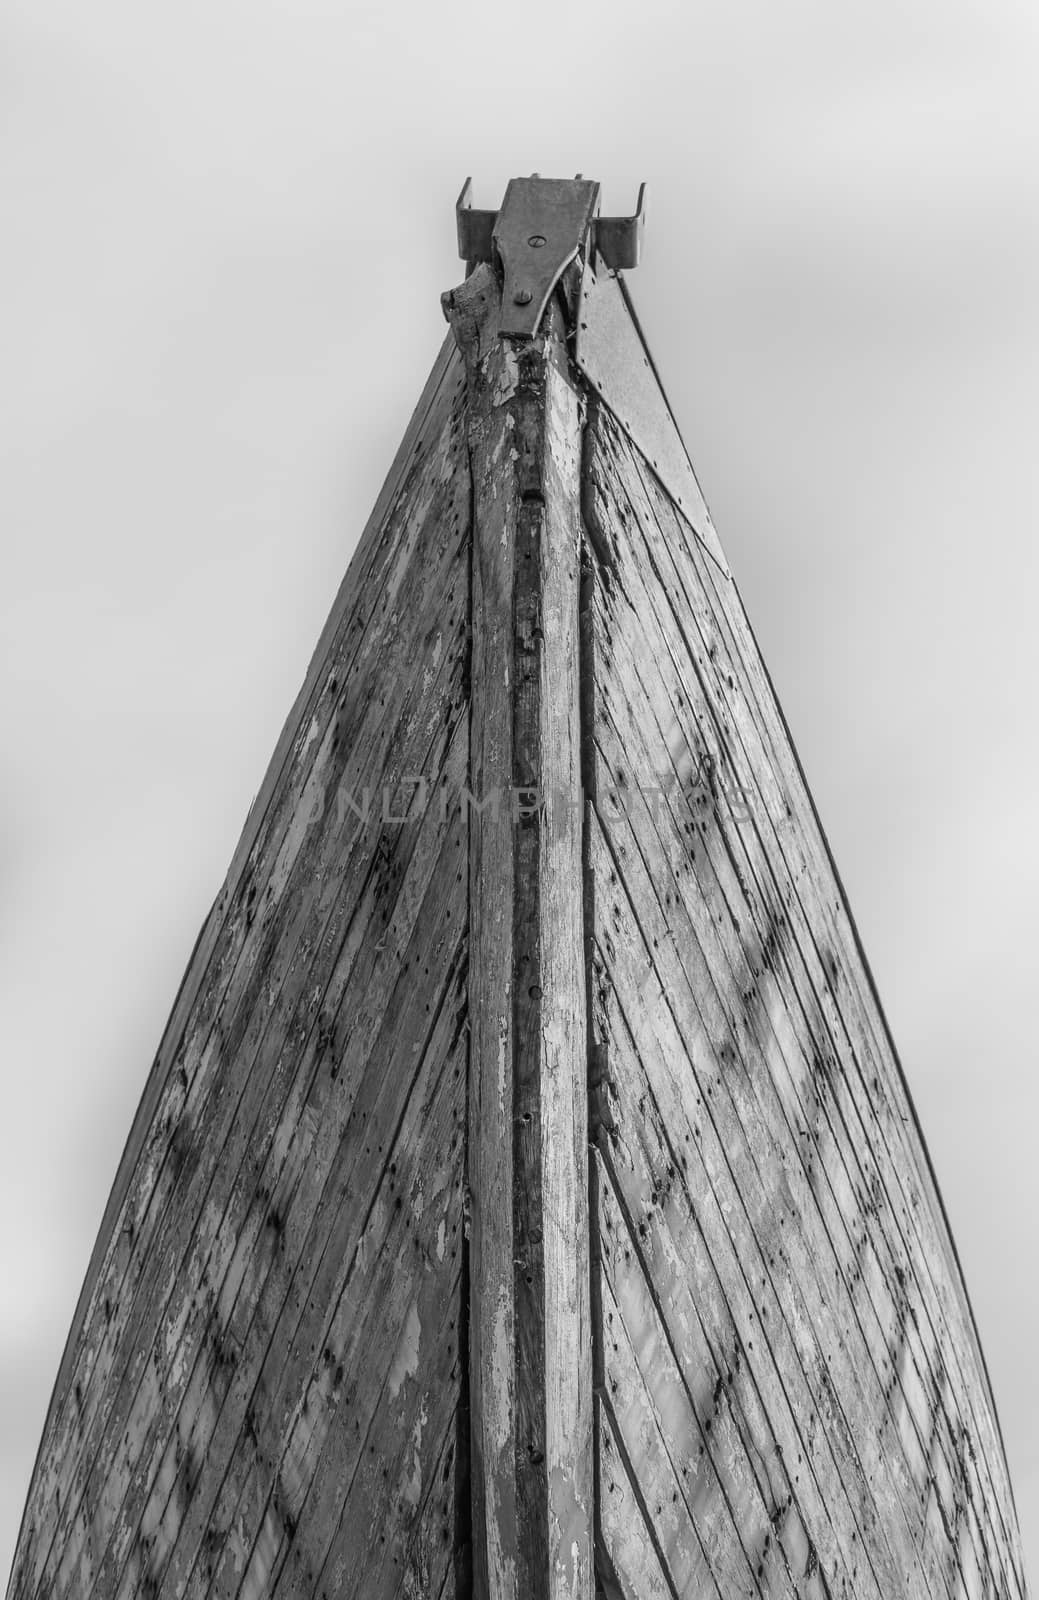 Old Wooden Boat Bow Close-up, Black and White  by radzonimo